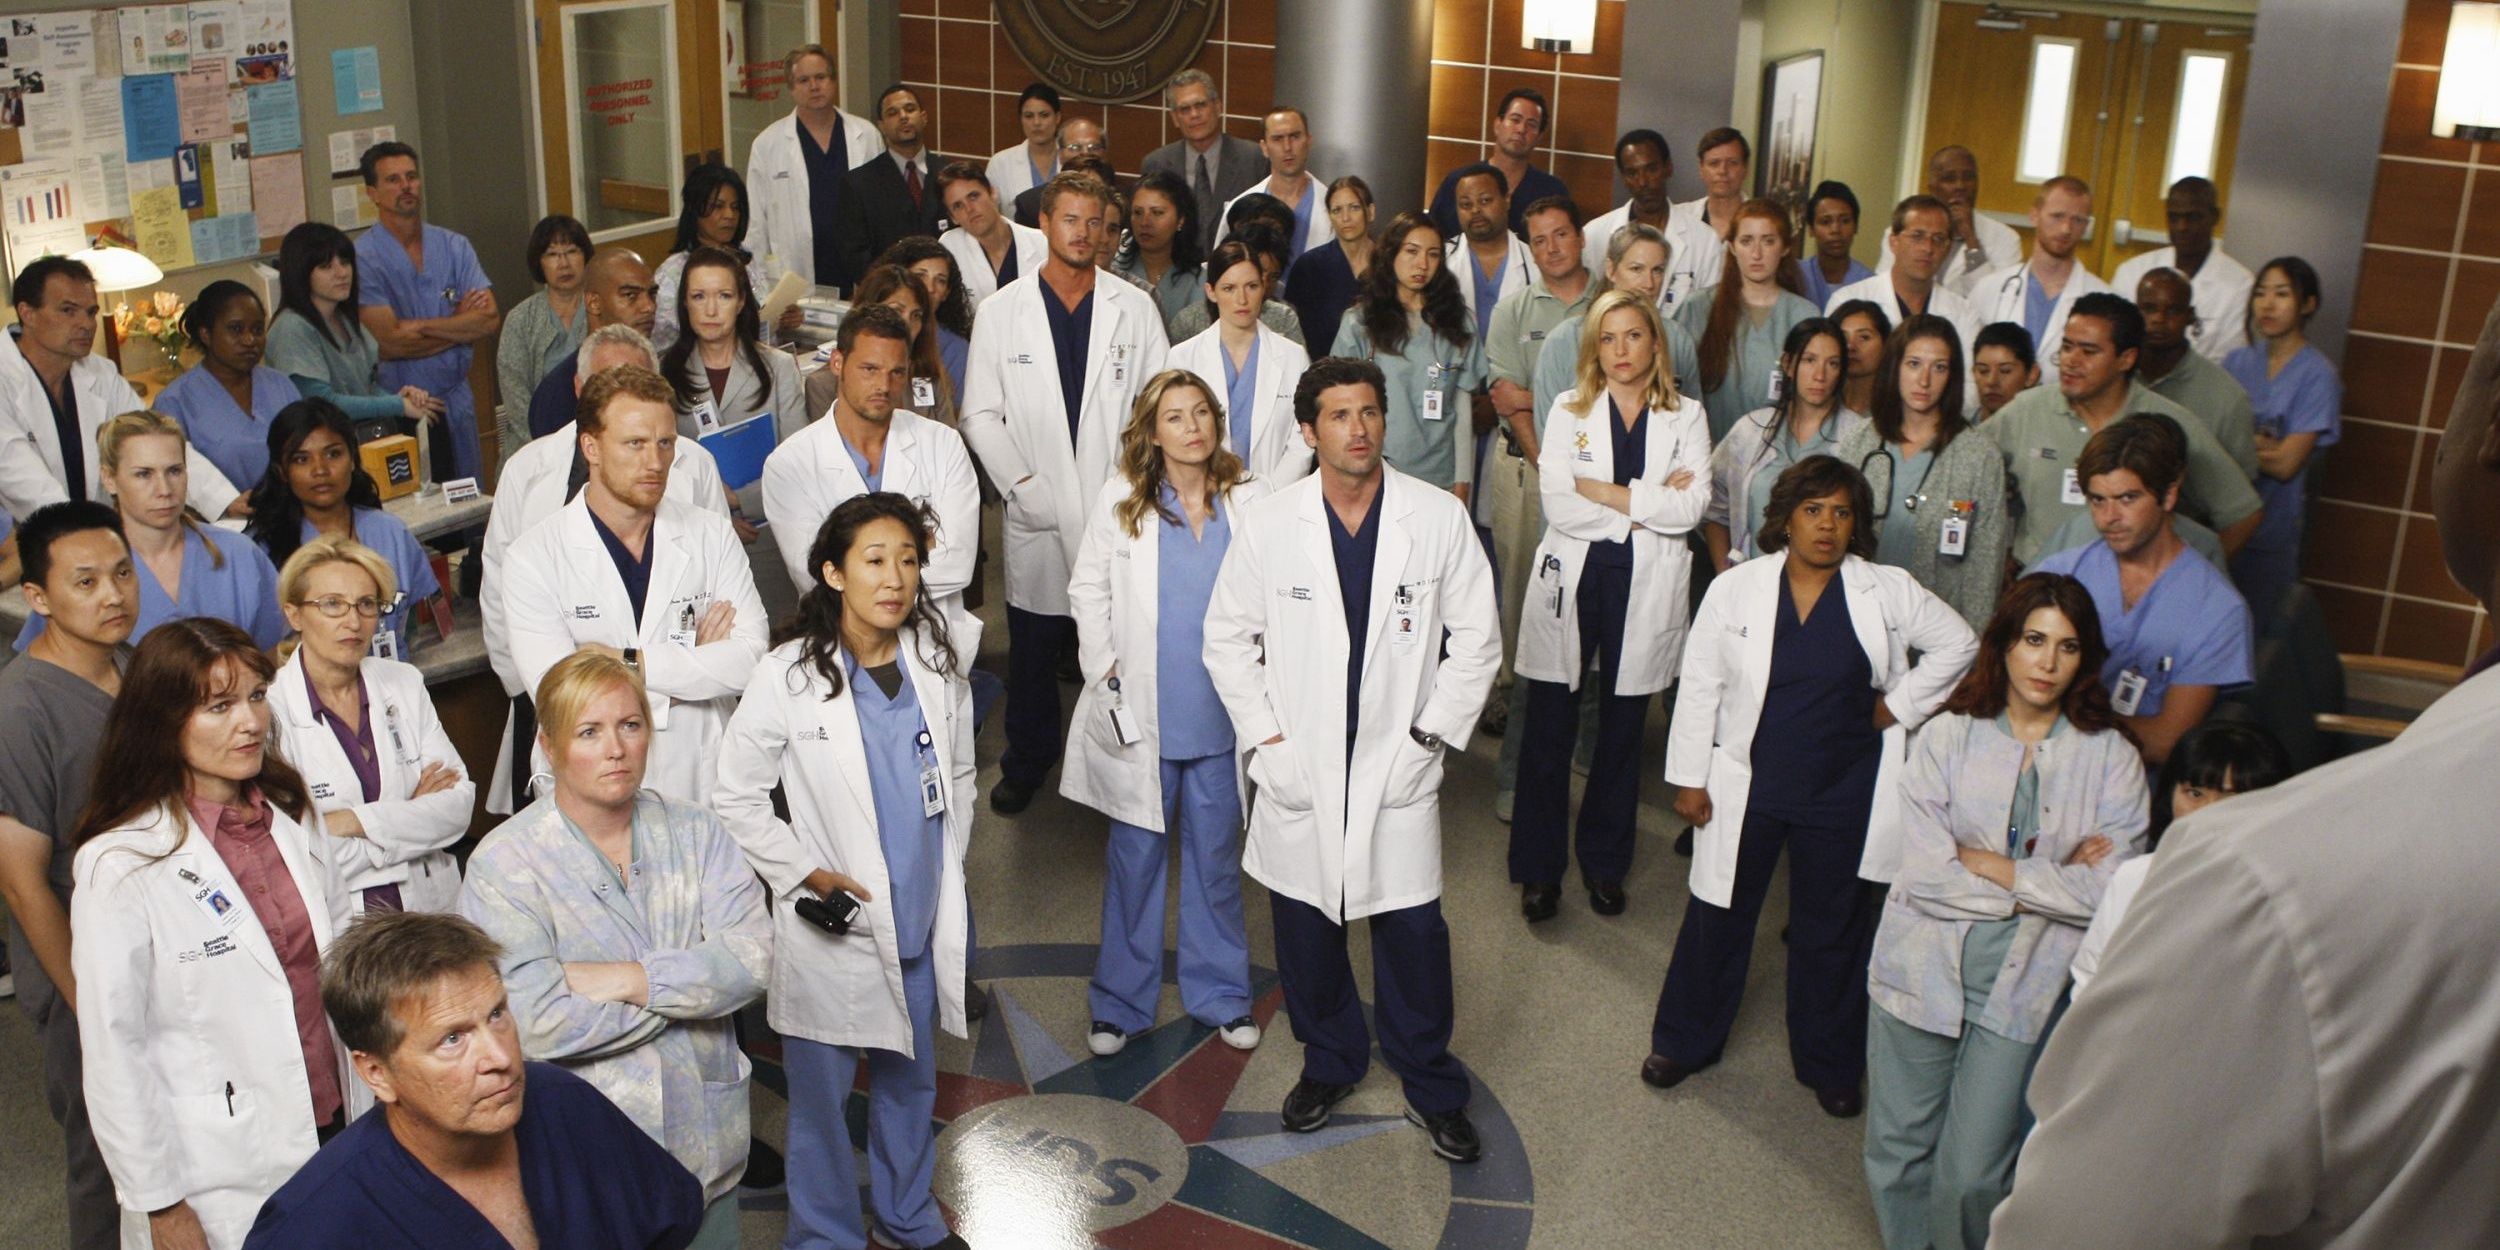 Hospital doctors stand around listening to an announcement in Greys Anatomy Cropped